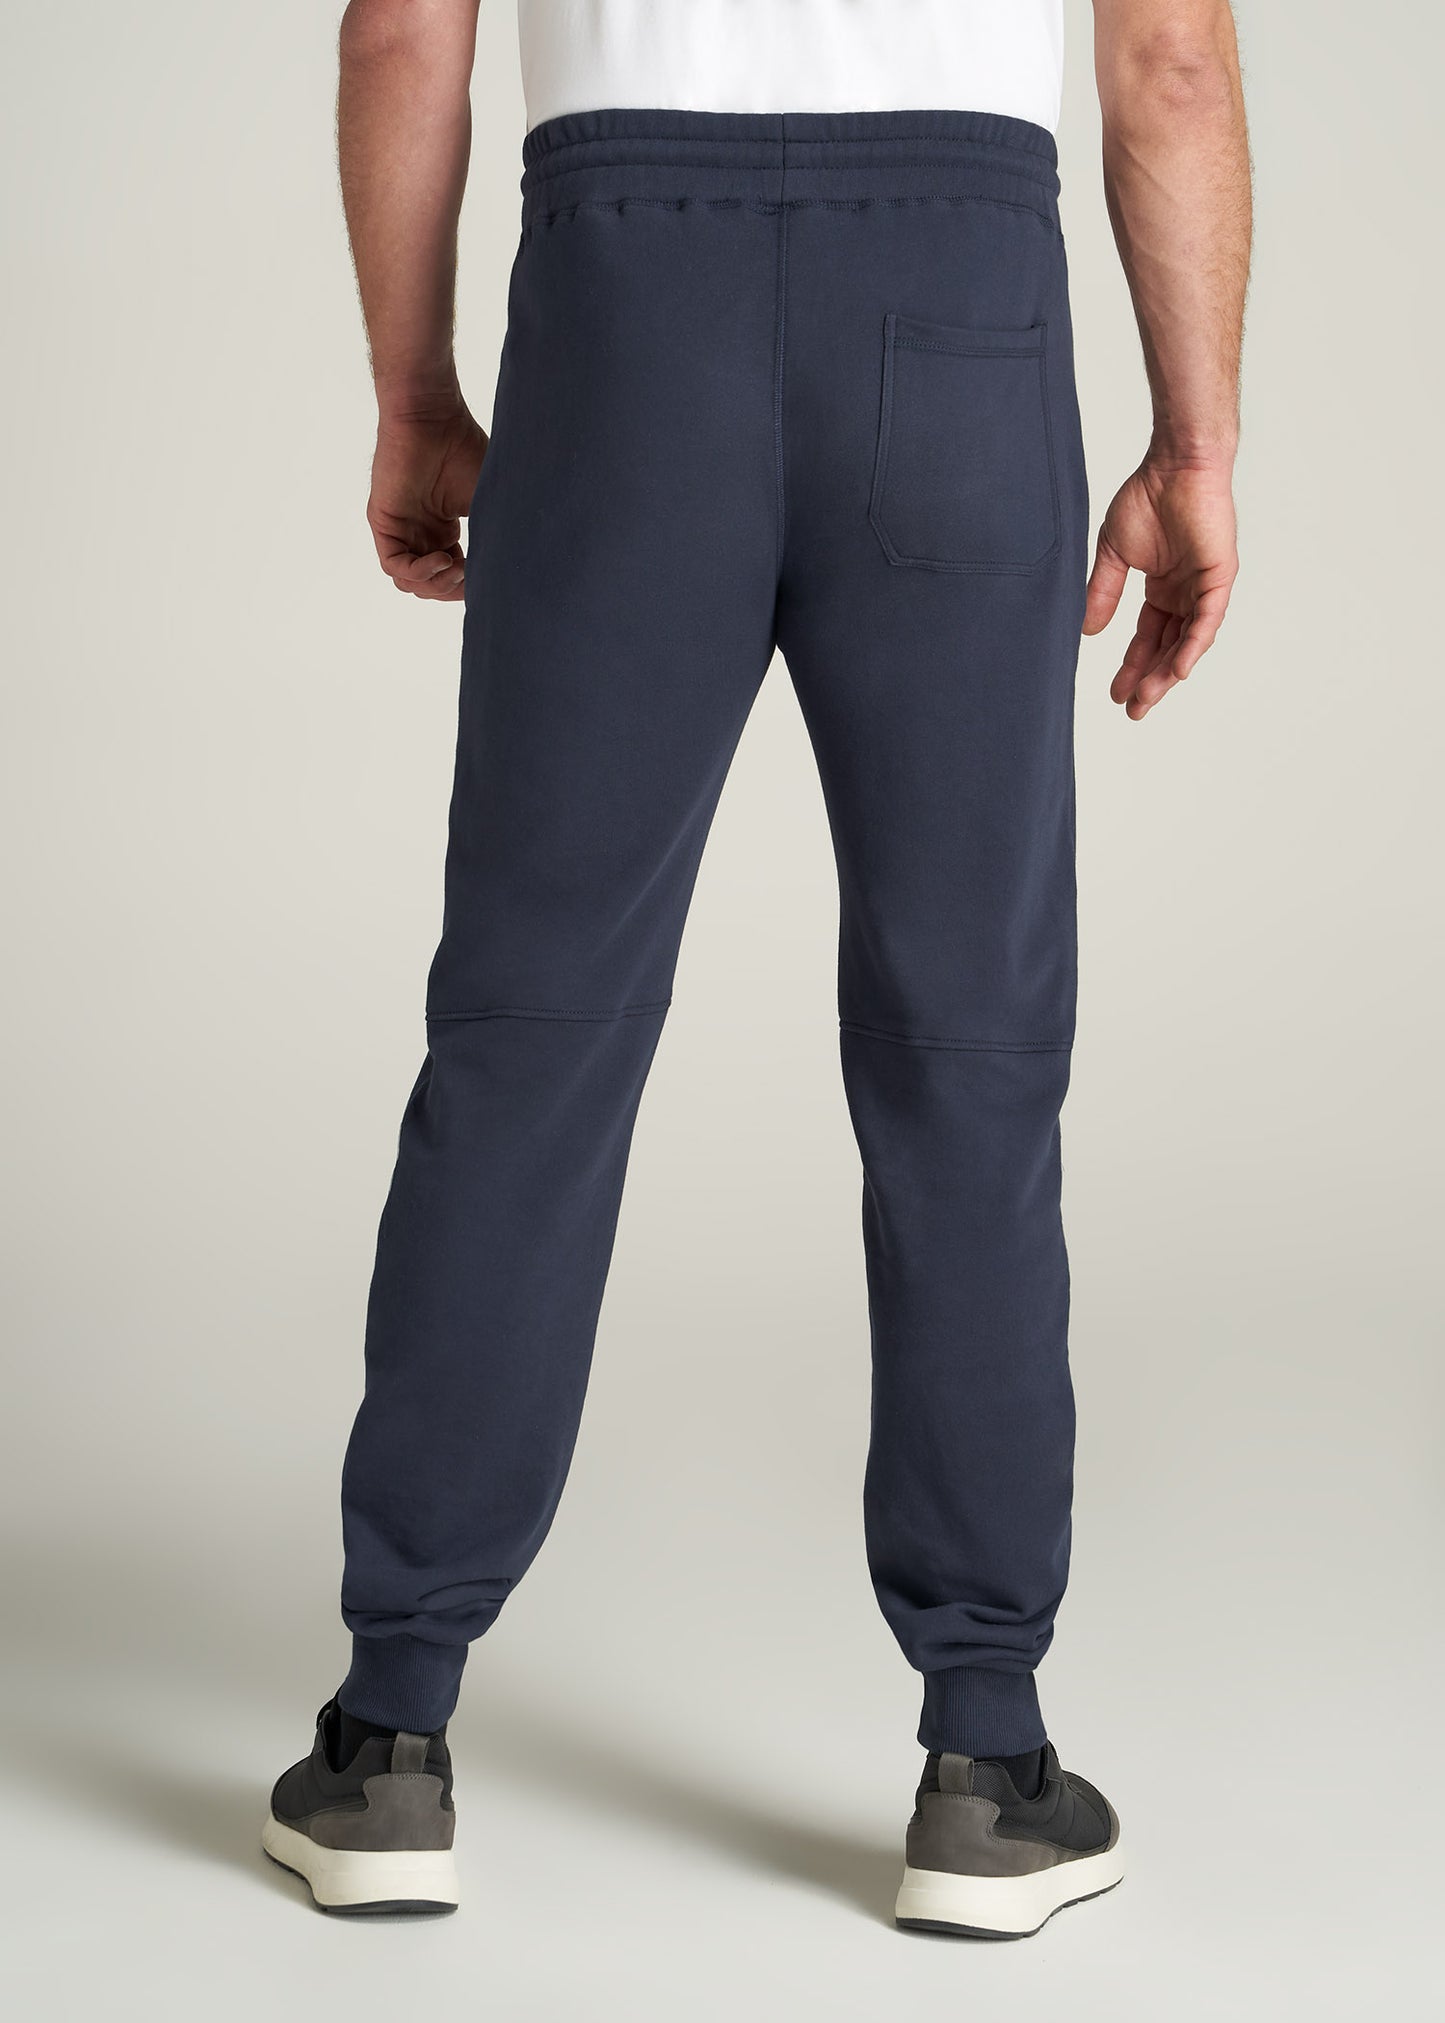       American-Tall-Men-80-20-FrenchTerry-Jogger-Navy-back